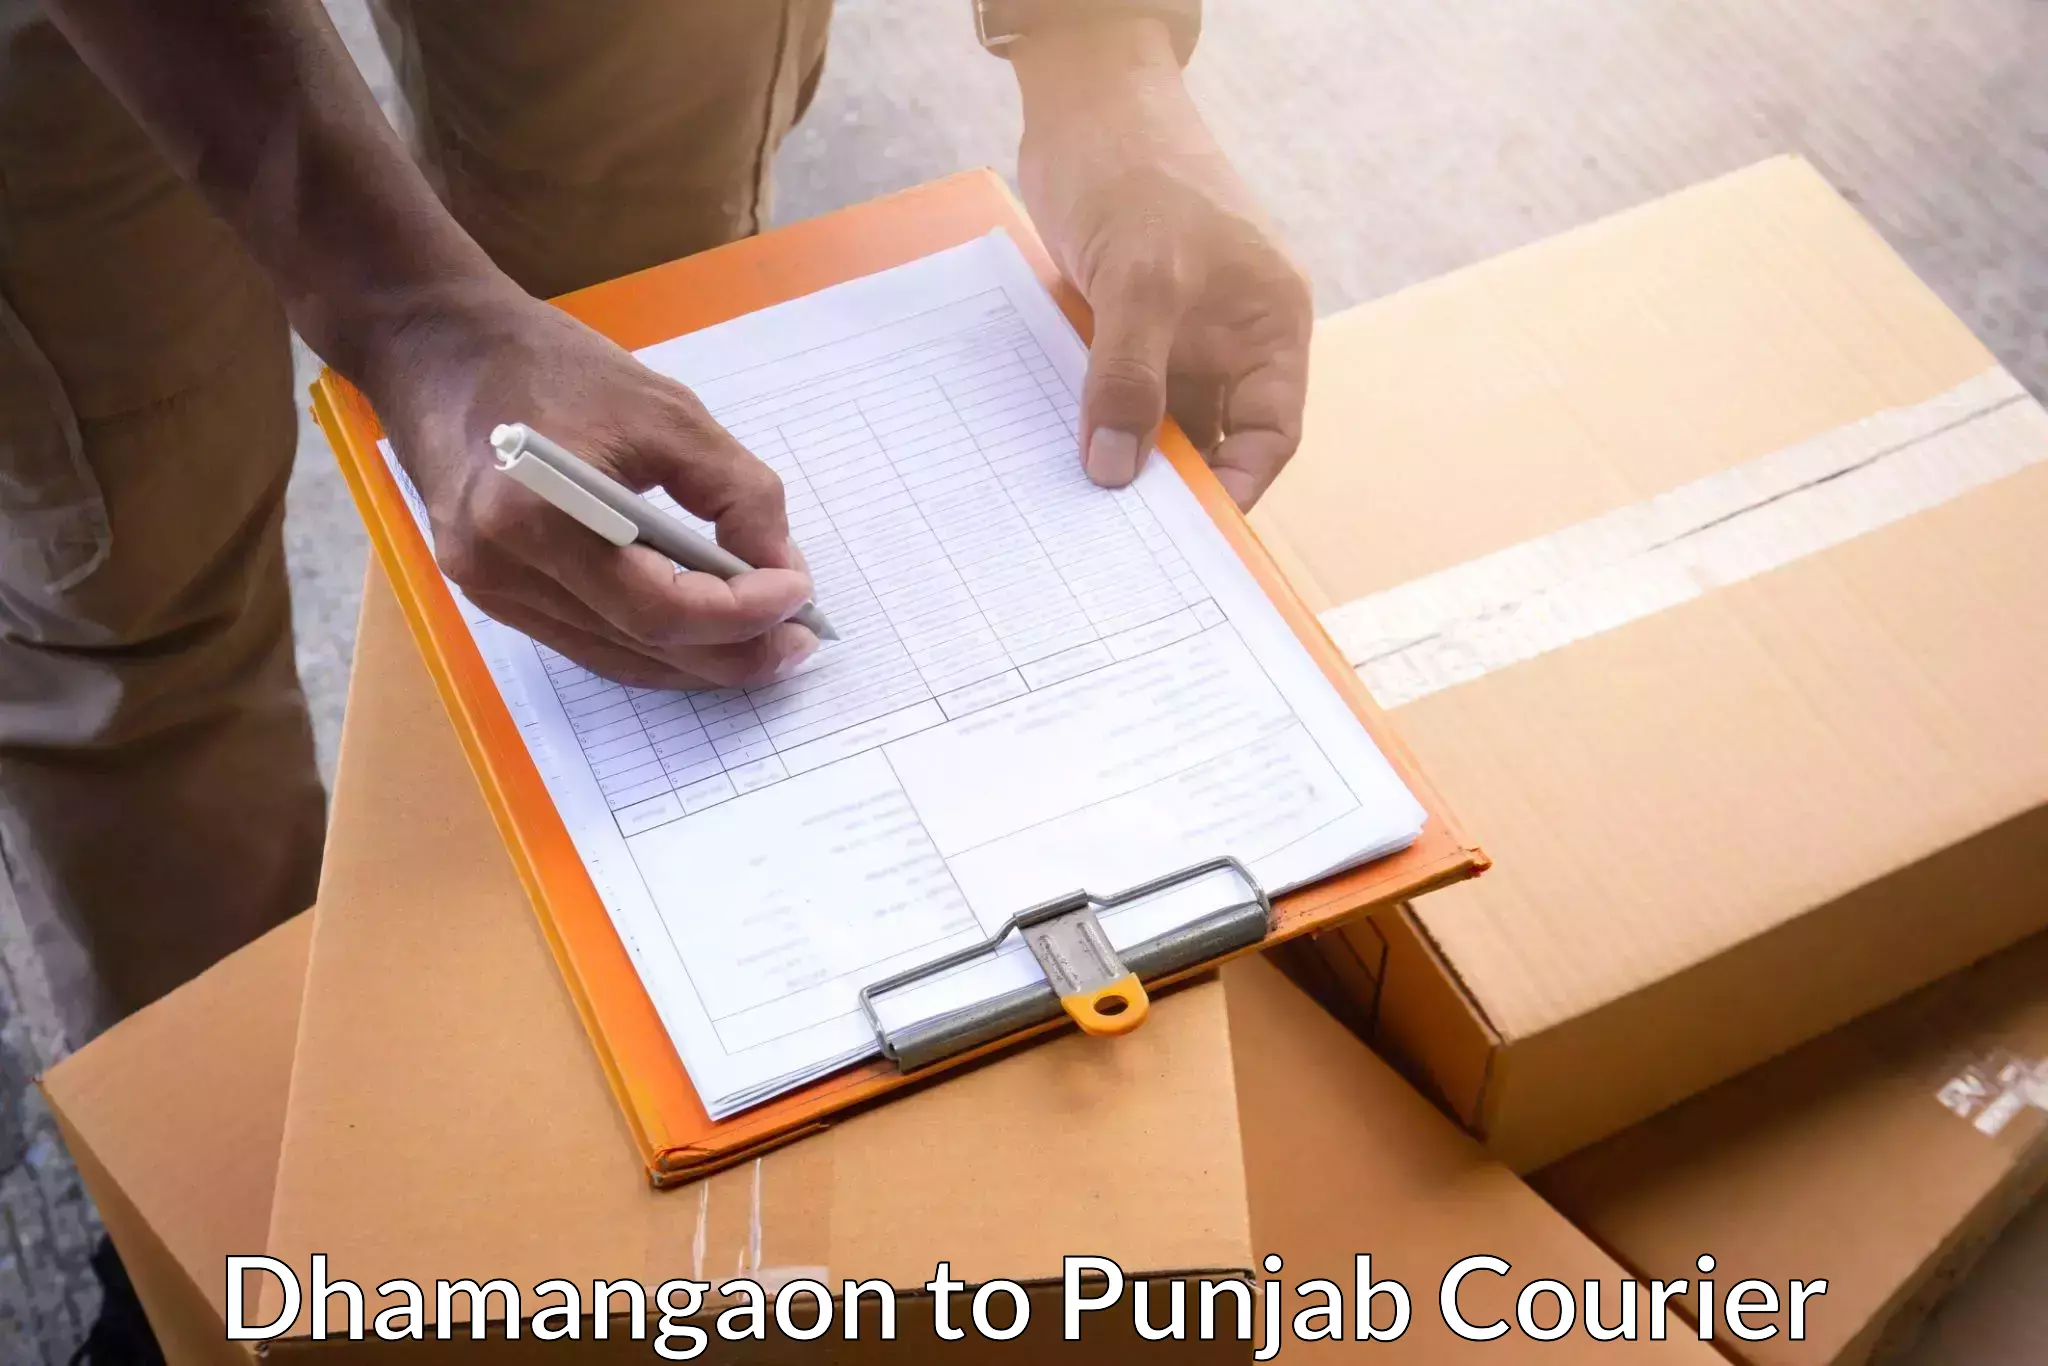 Reliable courier service in Dhamangaon to IIT Ropar